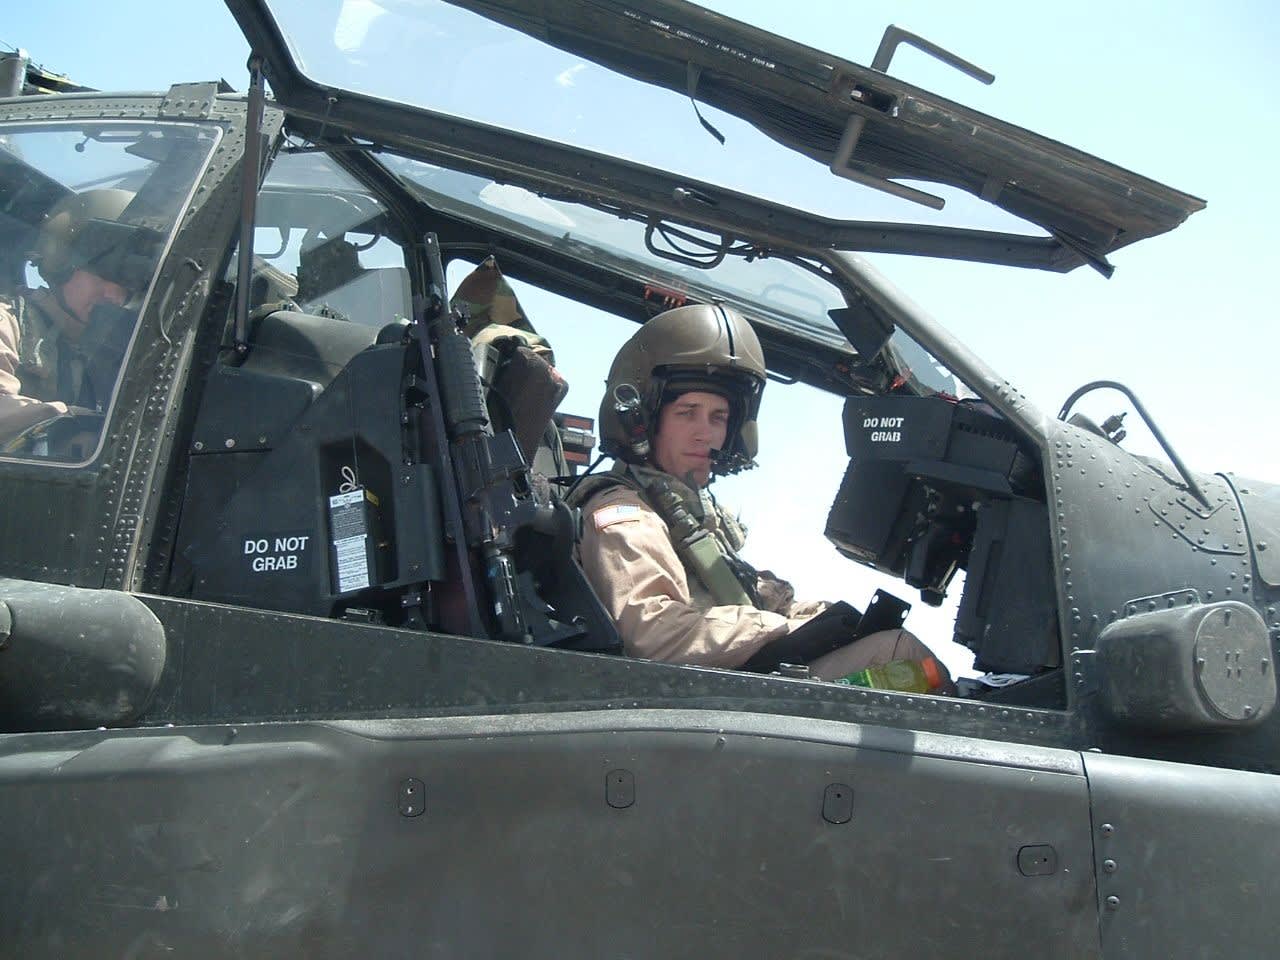 Clinton T. Speegle in an Apache helicopter in Iraq.